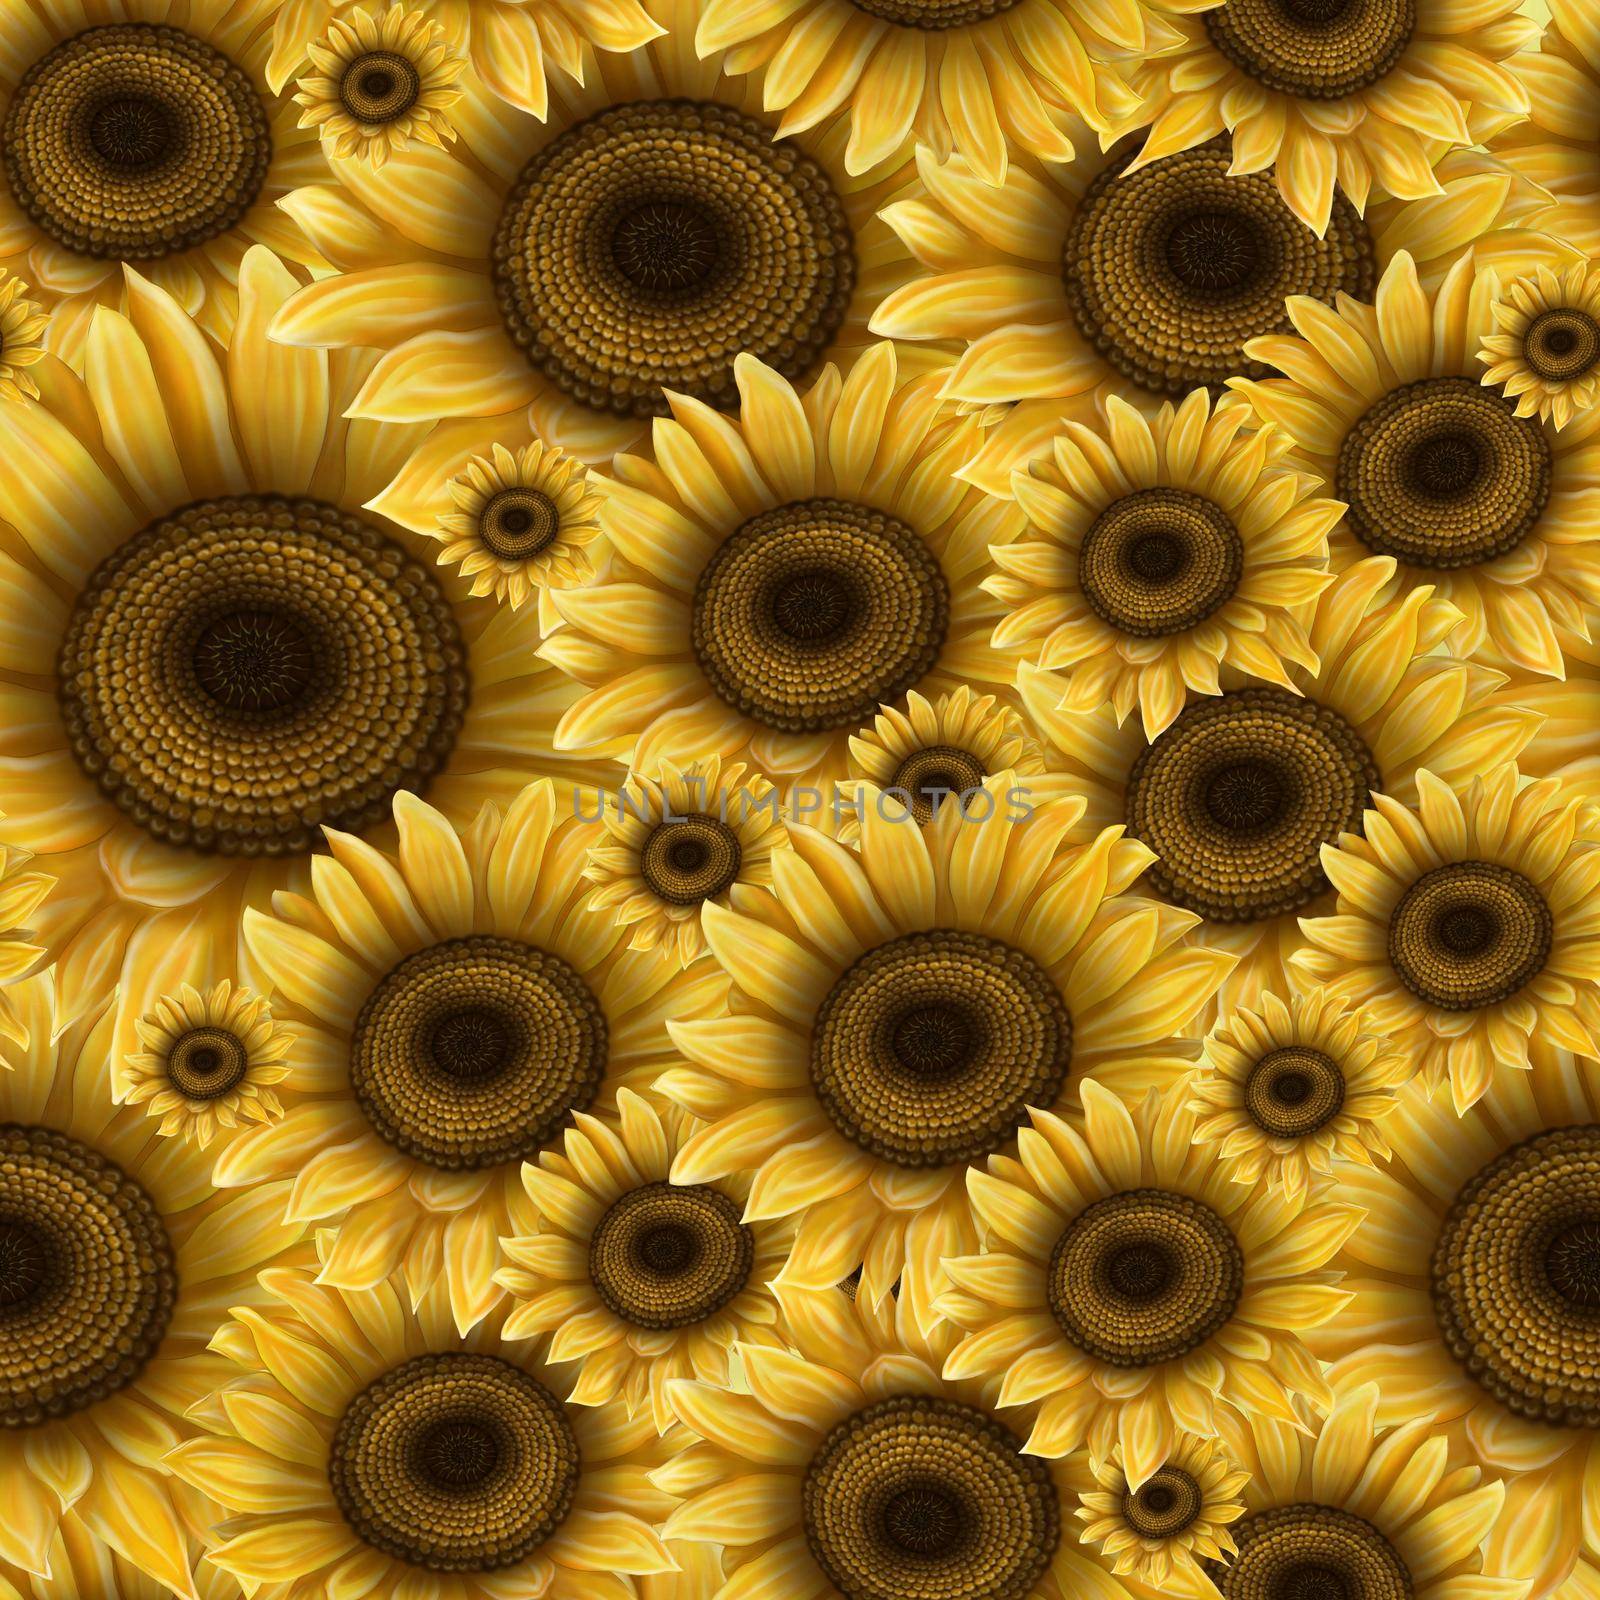 Seamless pattern for printing. Illustration of sunflower flowers. Bright flowers on a light background.  by Alina_Lebed